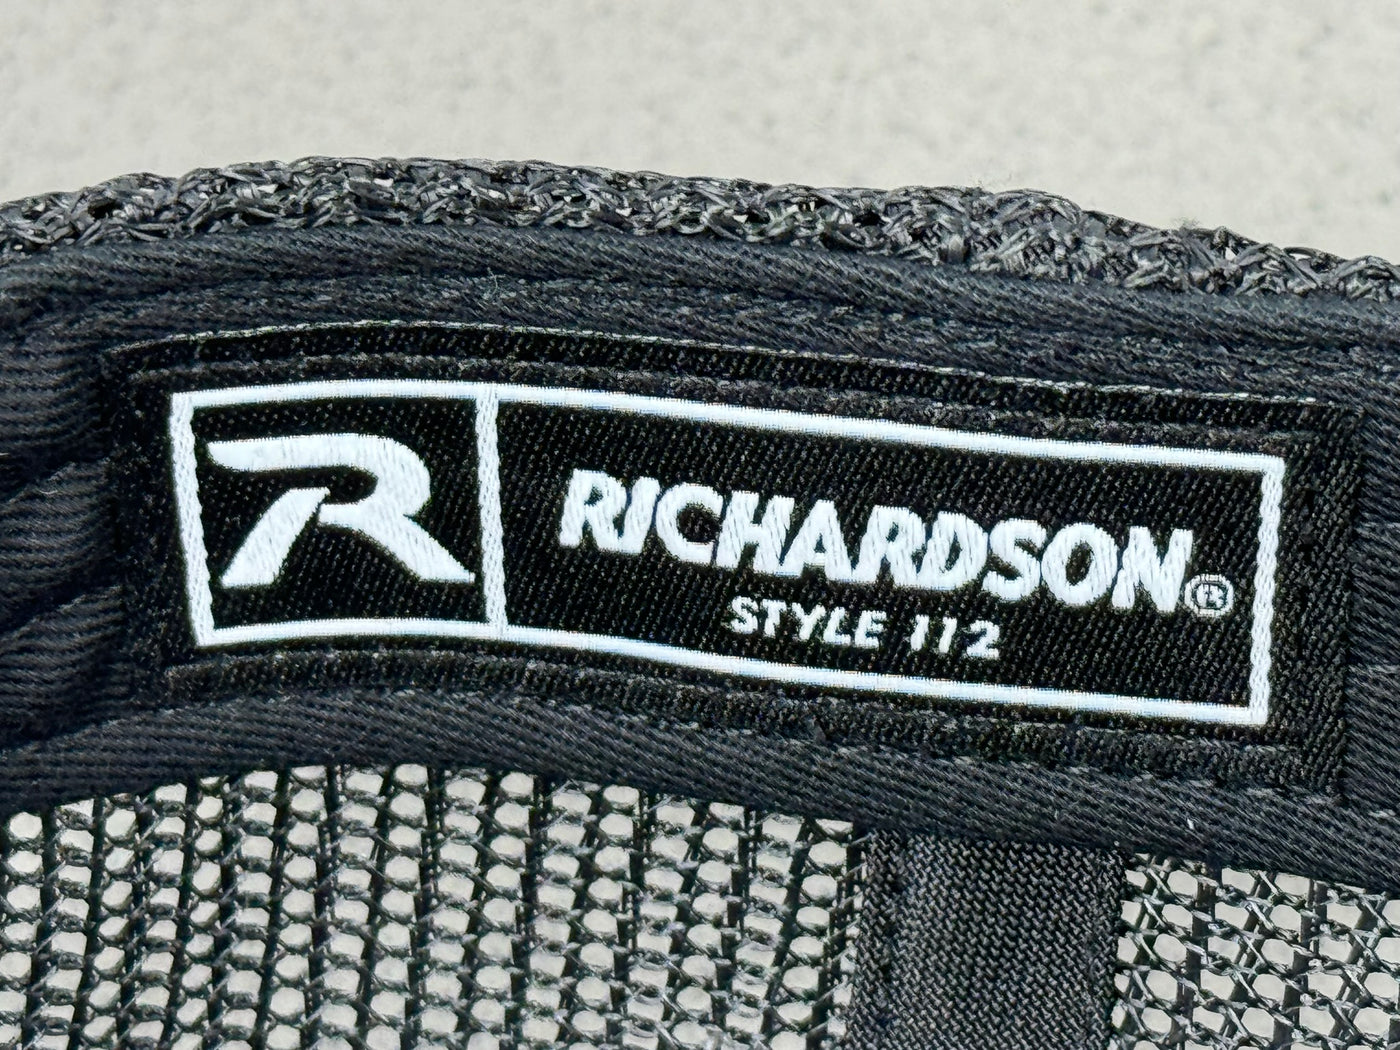 J&J All Black Embroidered Richardson 112 Trucker Adjustable Hat with Free Shipping